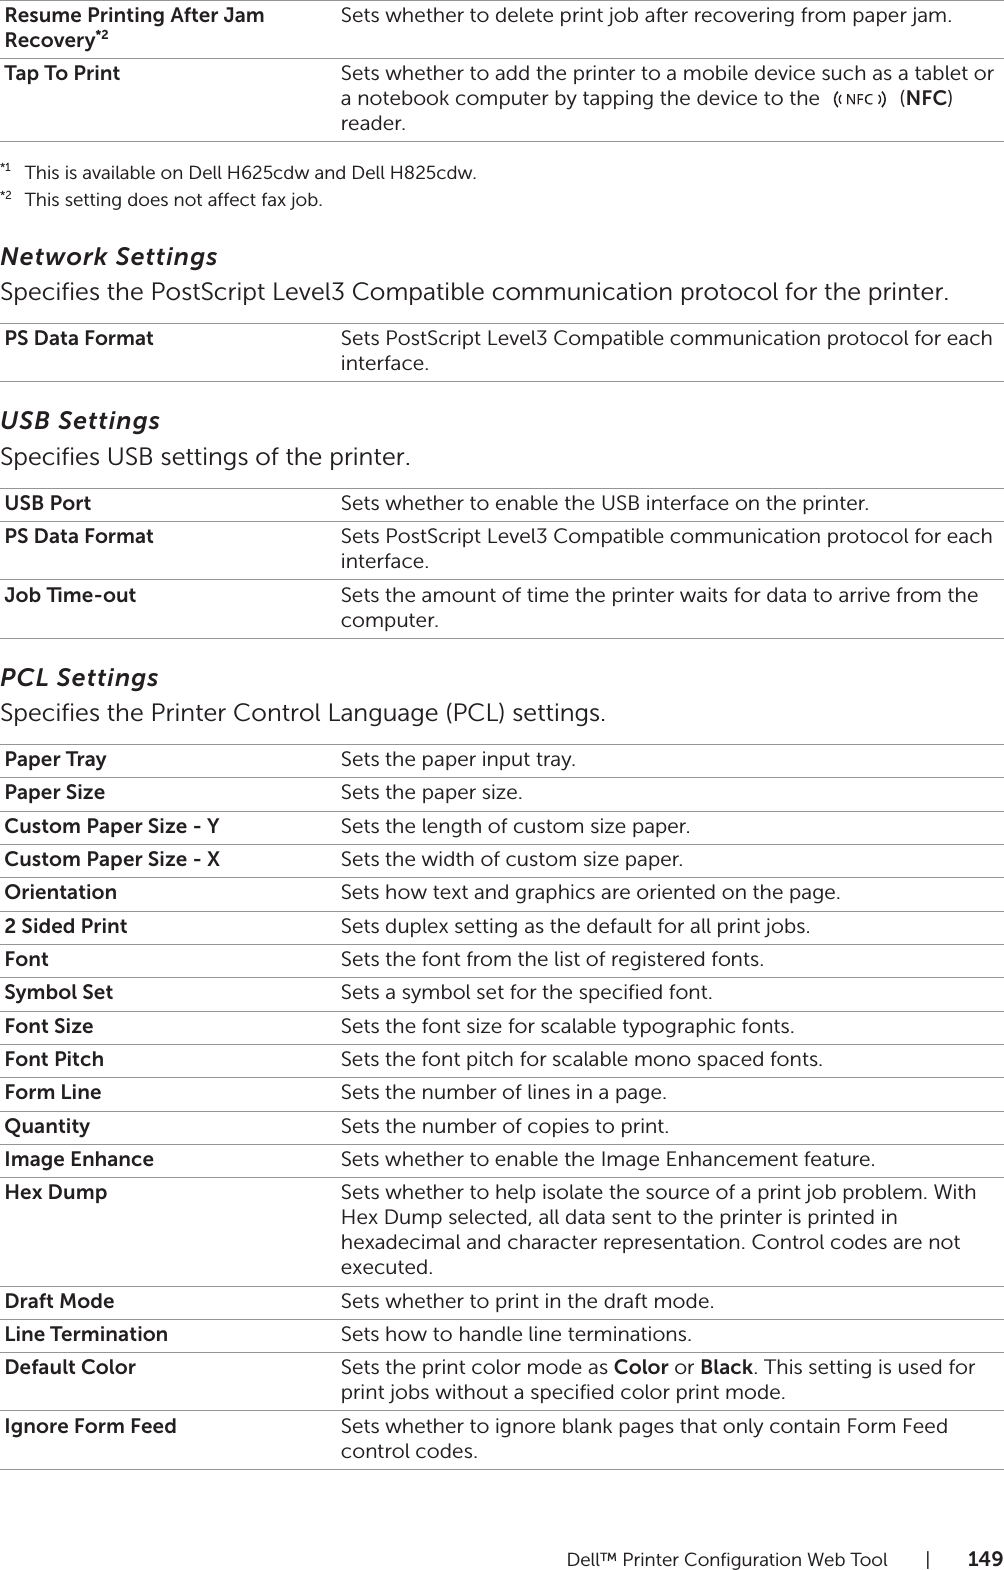 Dell™ Printer Configuration Web Tool |149*1This is available on Dell H625cdw and Dell H825cdw.*2This setting does not affect fax job.Network SettingsSpecifies the PostScript Level3 Compatible communication protocol for the printer.USB SettingsSpecifies USB settings of the printer.PCL SettingsSpecifies the Printer Control Language (PCL) settings.Resume Printing After Jam Recovery*2Sets whether to delete print job after recovering from paper jam.Tap To Print Sets whether to add the printer to a mobile device such as a tablet or a notebook computer by tapping the device to the   (NFC) reader.PS Data Format Sets PostScript Level3 Compatible communication protocol for each interface.USB Port Sets whether to enable the USB interface on the printer.PS Data Format Sets PostScript Level3 Compatible communication protocol for each interface.Job Time-out Sets the amount of time the printer waits for data to arrive from the computer.Paper Tray Sets the paper input tray.Paper Size Sets the paper size.Custom Paper Size - Y Sets the length of custom size paper.Custom Paper Size - X Sets the width of custom size paper.Orientation Sets how text and graphics are oriented on the page.2 Sided Print Sets duplex setting as the default for all print jobs.Font Sets the font from the list of registered fonts.Symbol Set Sets a symbol set for the specified font.Font Size Sets the font size for scalable typographic fonts.Font Pitch Sets the font pitch for scalable mono spaced fonts.Form Line Sets the number of lines in a page.Quantity Sets the number of copies to print.Image Enhance Sets whether to enable the Image Enhancement feature.Hex Dump Sets whether to help isolate the source of a print job problem. With Hex Dump selected, all data sent to the printer is printed in hexadecimal and character representation. Control codes are not executed.Draft Mode Sets whether to print in the draft mode.Line Termination Sets how to handle line terminations.Default Color Sets the print color mode as Color or Black. This setting is used for print jobs without a specified color print mode.Ignore Form Feed Sets whether to ignore blank pages that only contain Form Feed control codes.